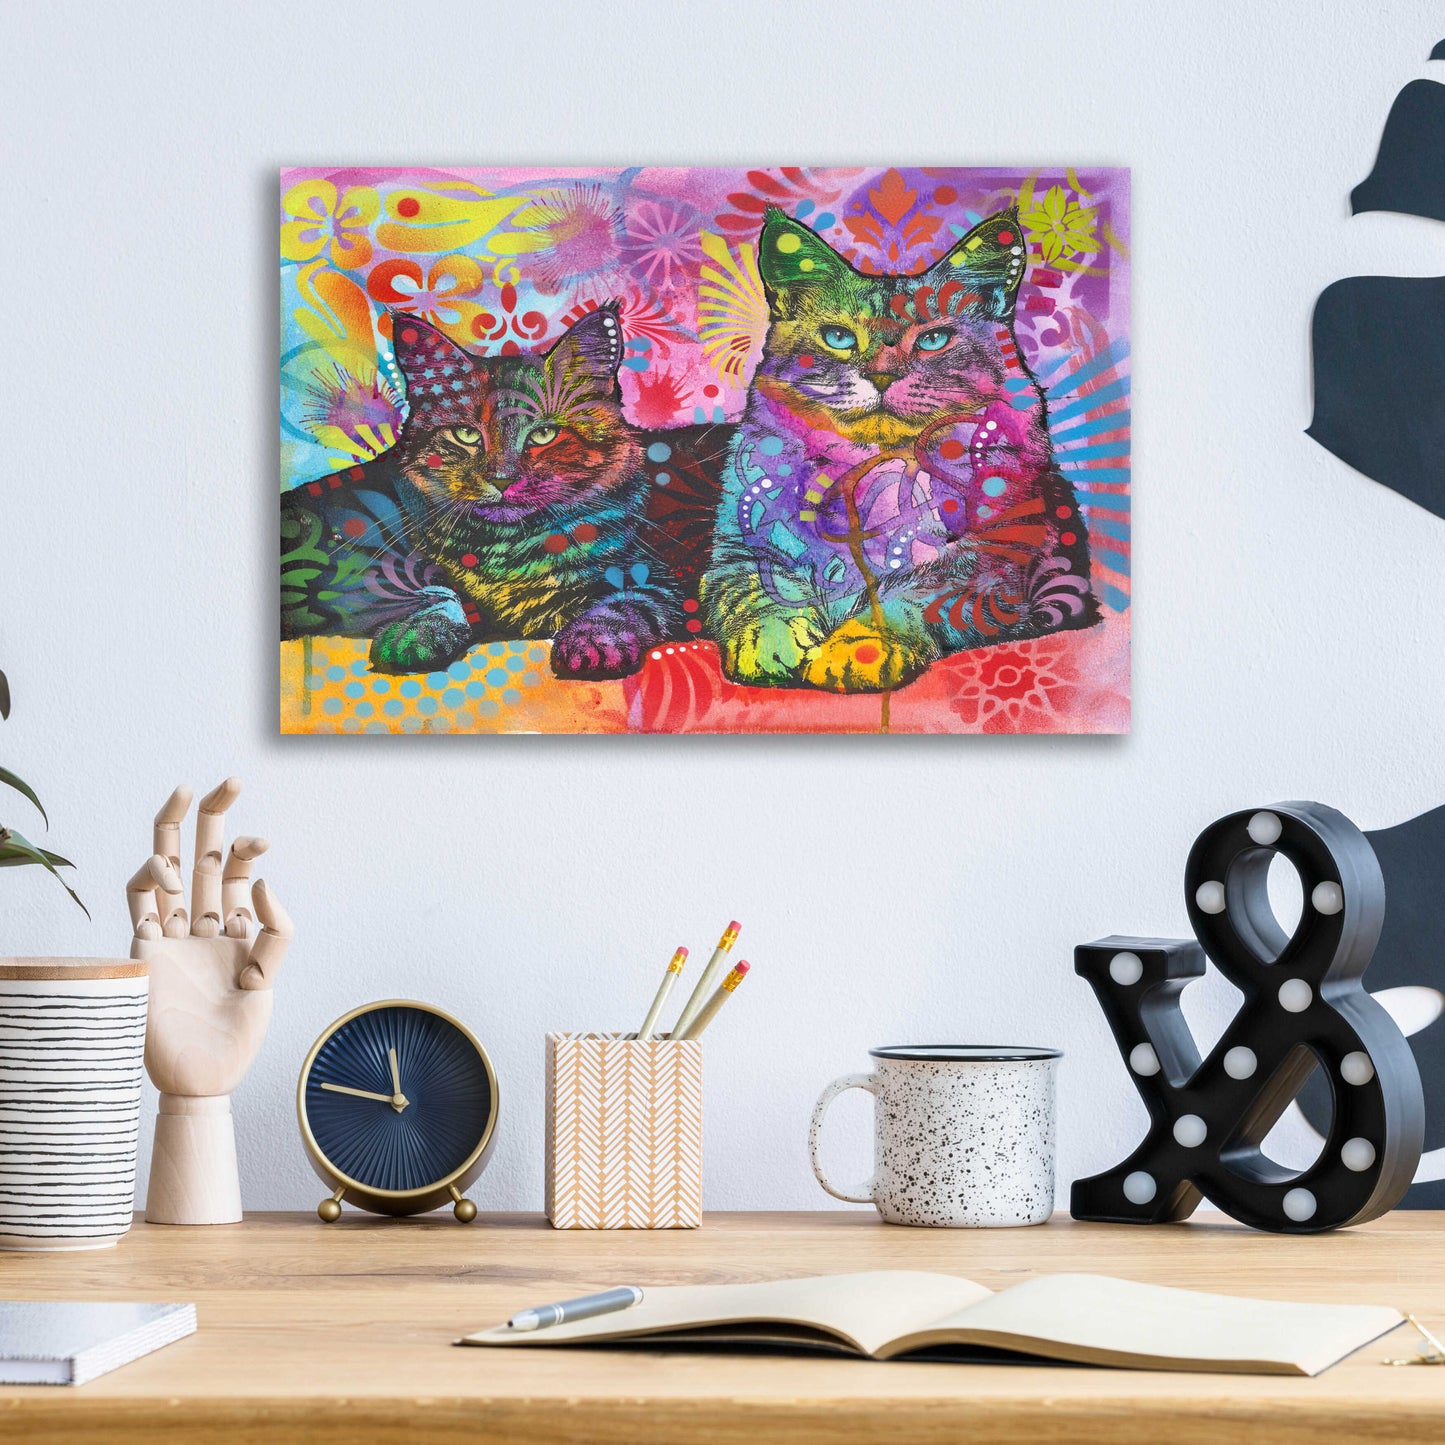 Epic Art '2 Cats' by Dean Russo, Acrylic Glass Wall Art,16x12